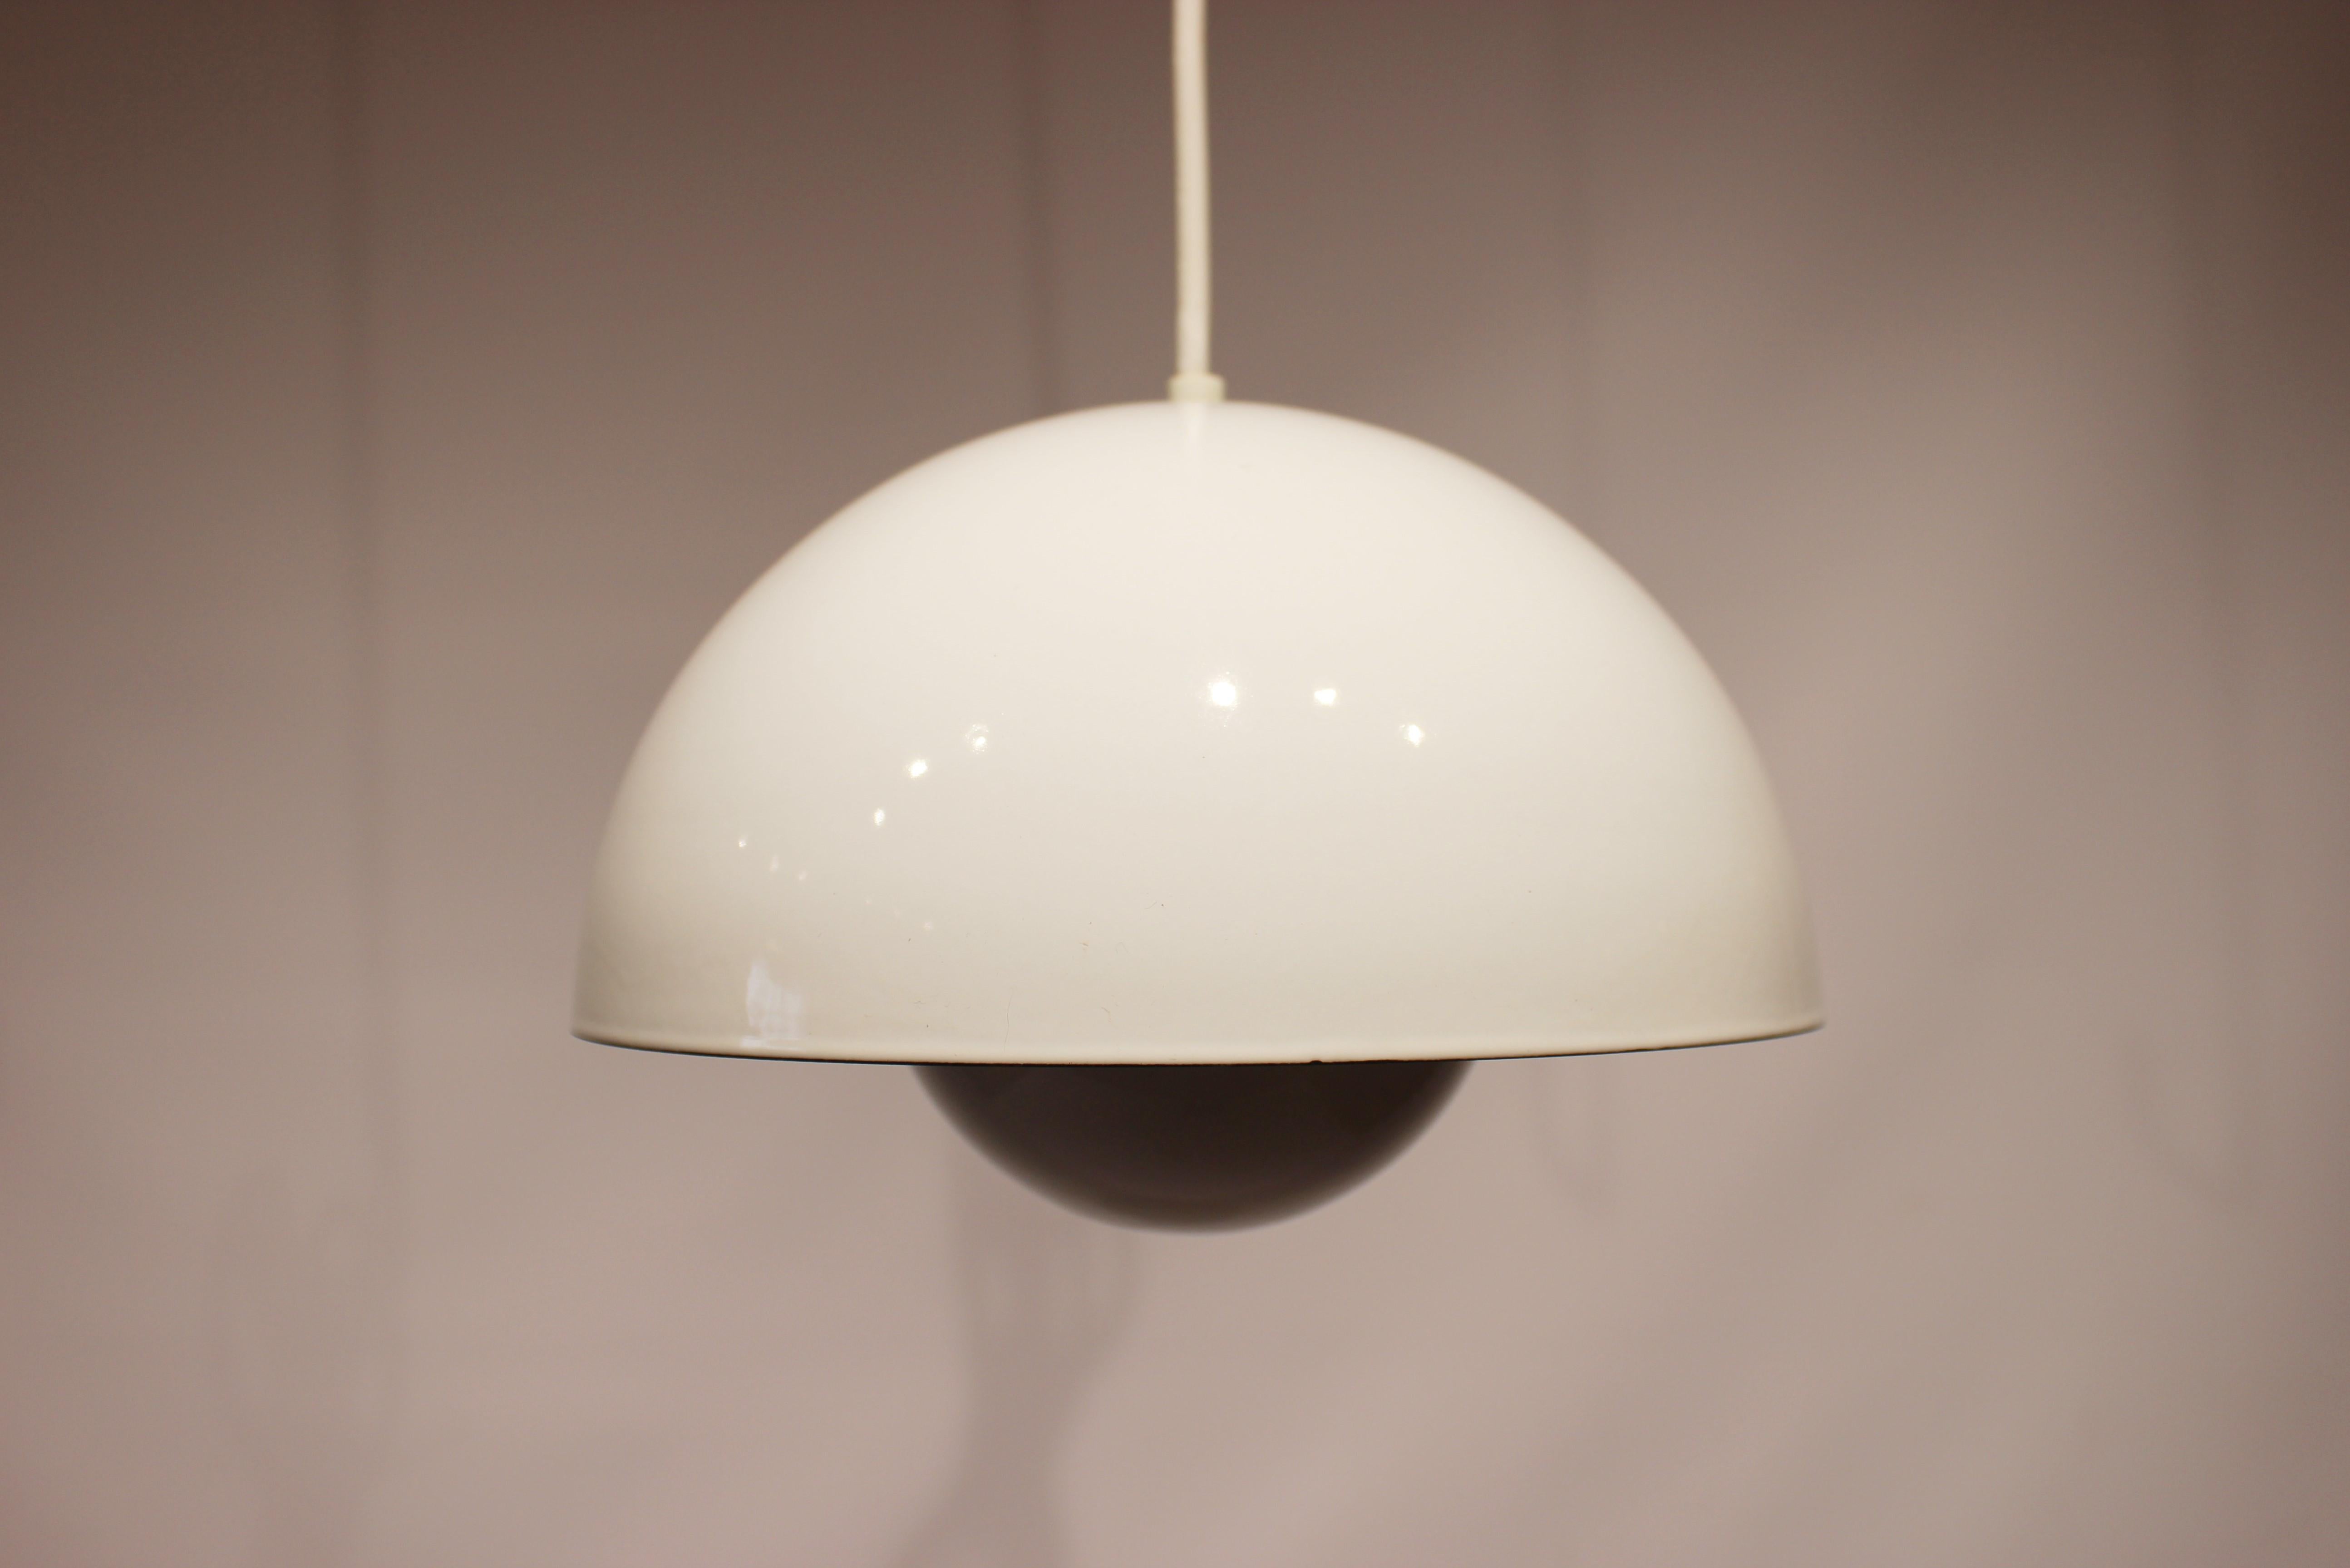 A pair of flowerpot, model VP1, pendants in white designed by Verner Panton in 1968 and manufactured in the 1970s. The lamps are in great vintage condition.